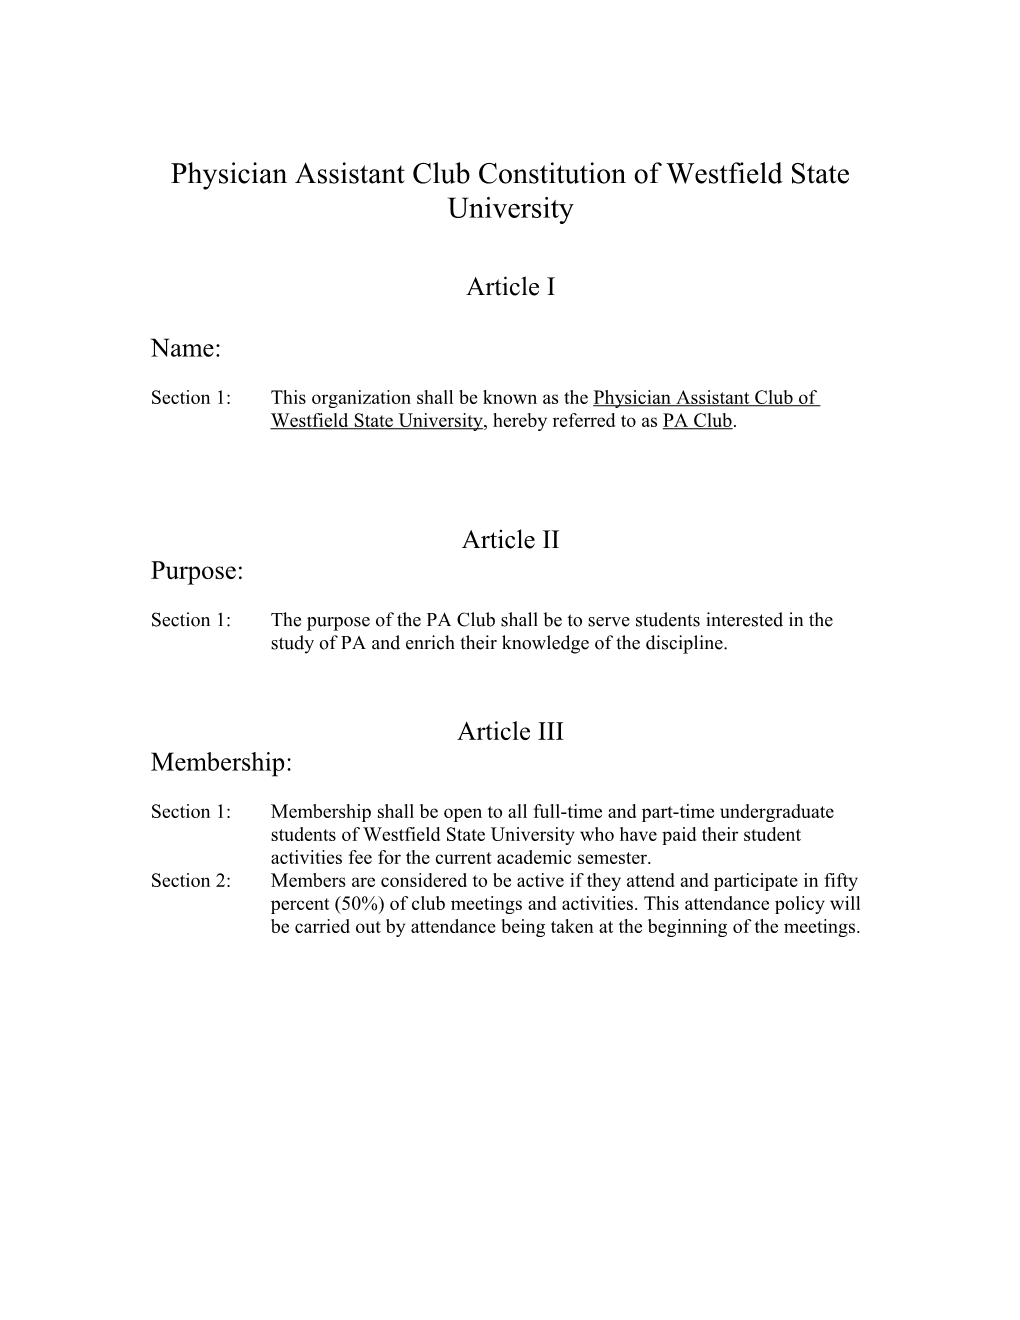 Physician Assistantclub Constitutionof Westfield State University